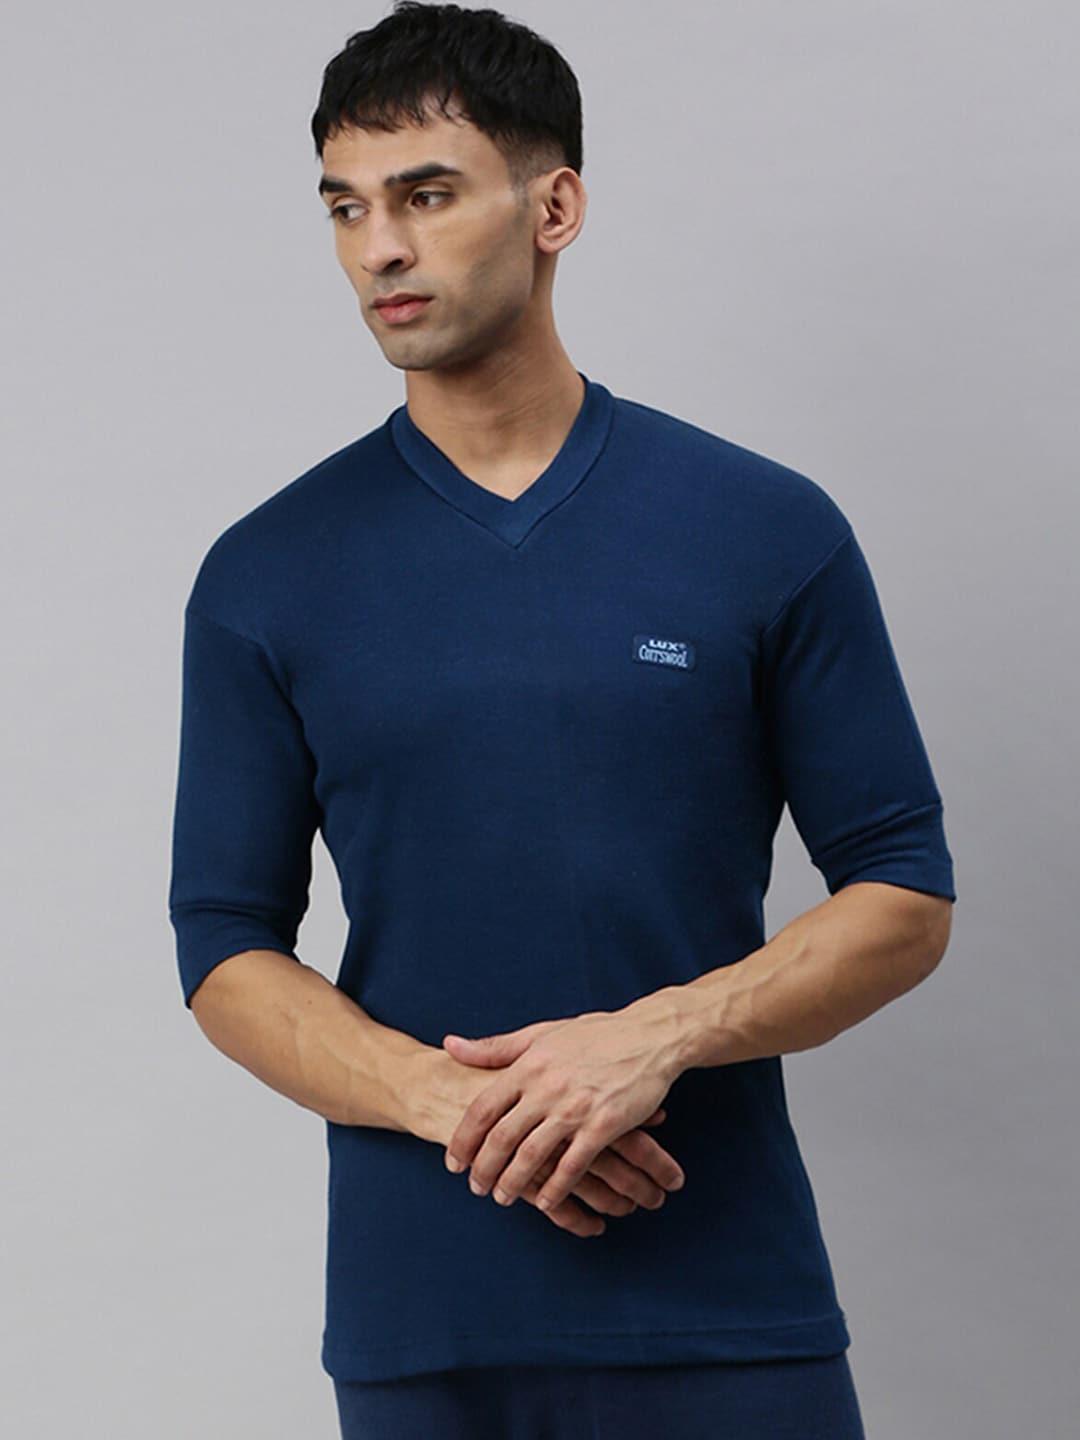 lux cottswool v-neck logo printed thermal tops